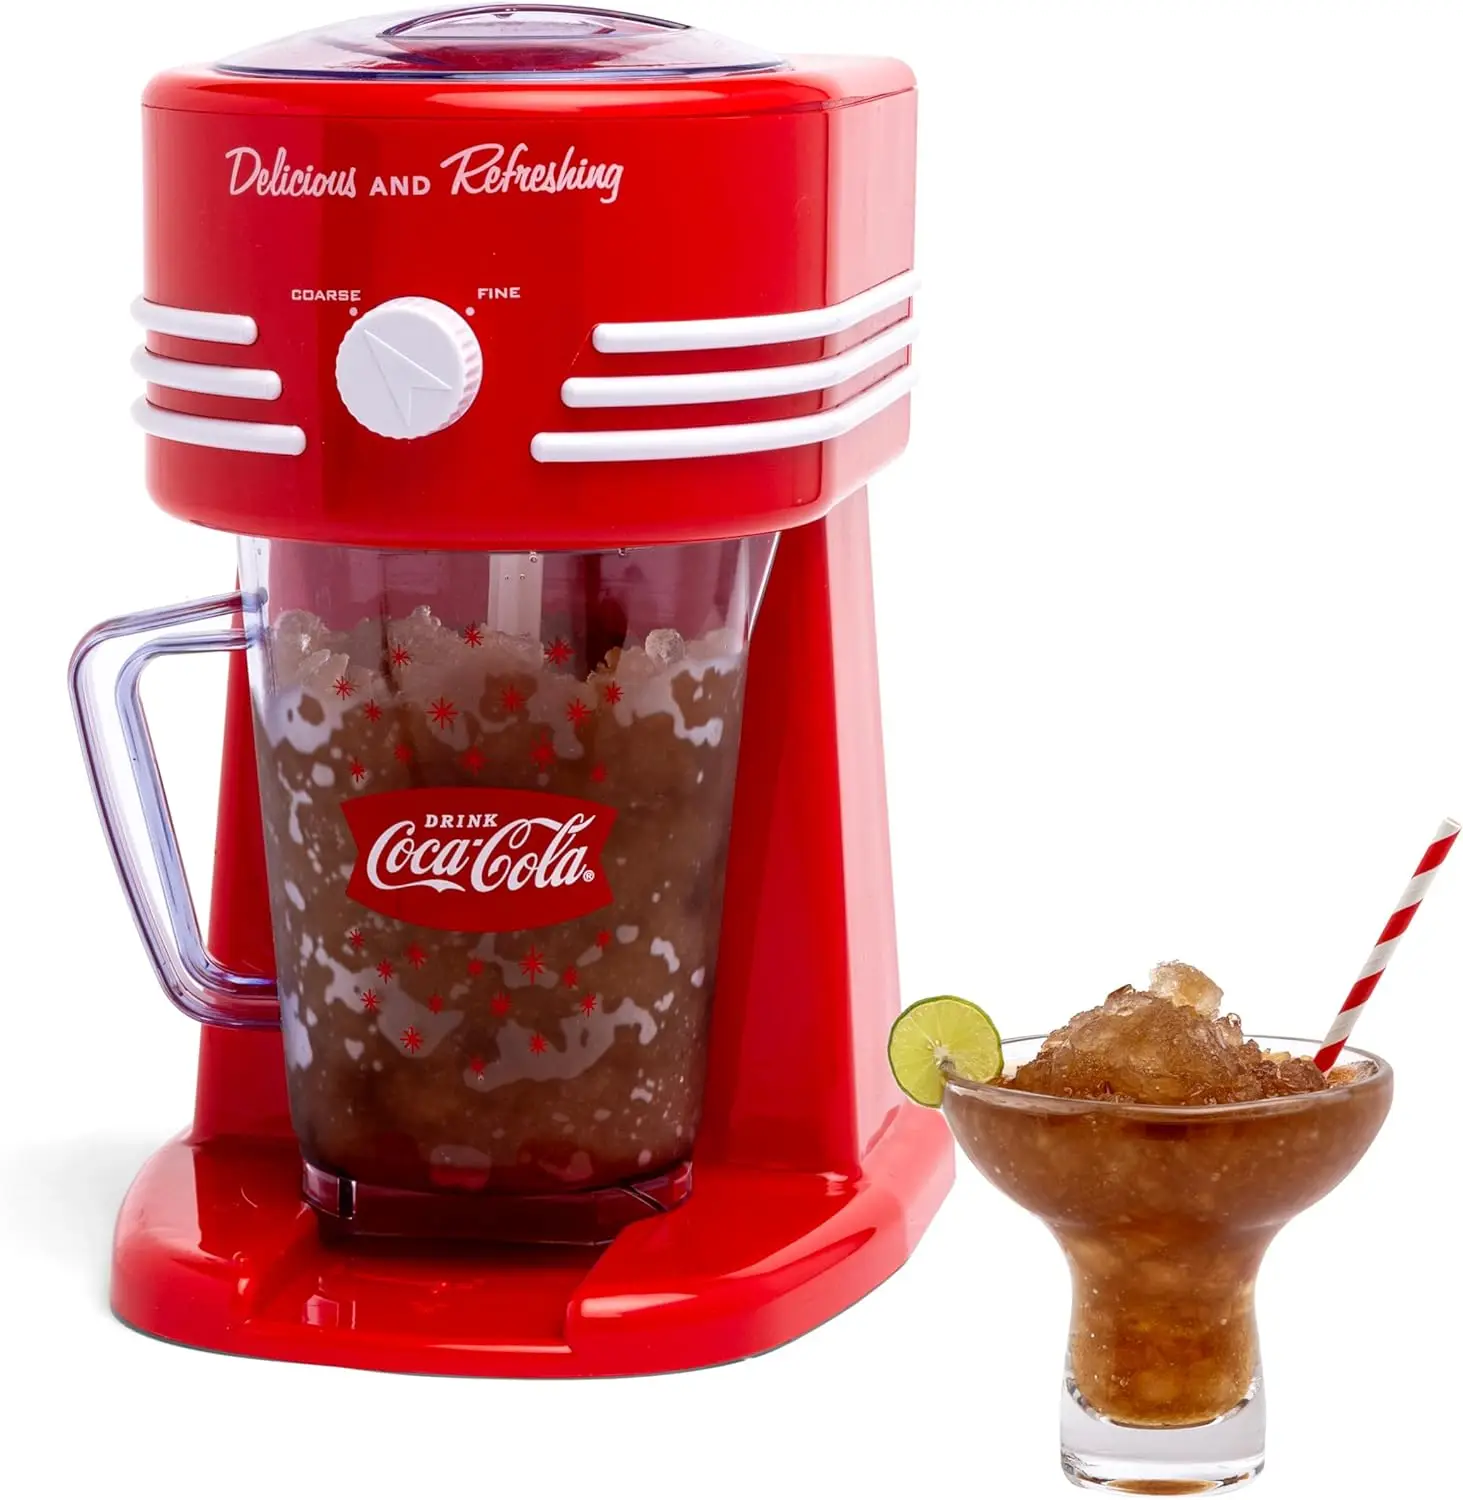 

Nostalgia Coca-Cola Frozen Drink Maker and Margarita Machine for Home - 40-Ounce Slushy Maker with Stainless Steel Flow Spout